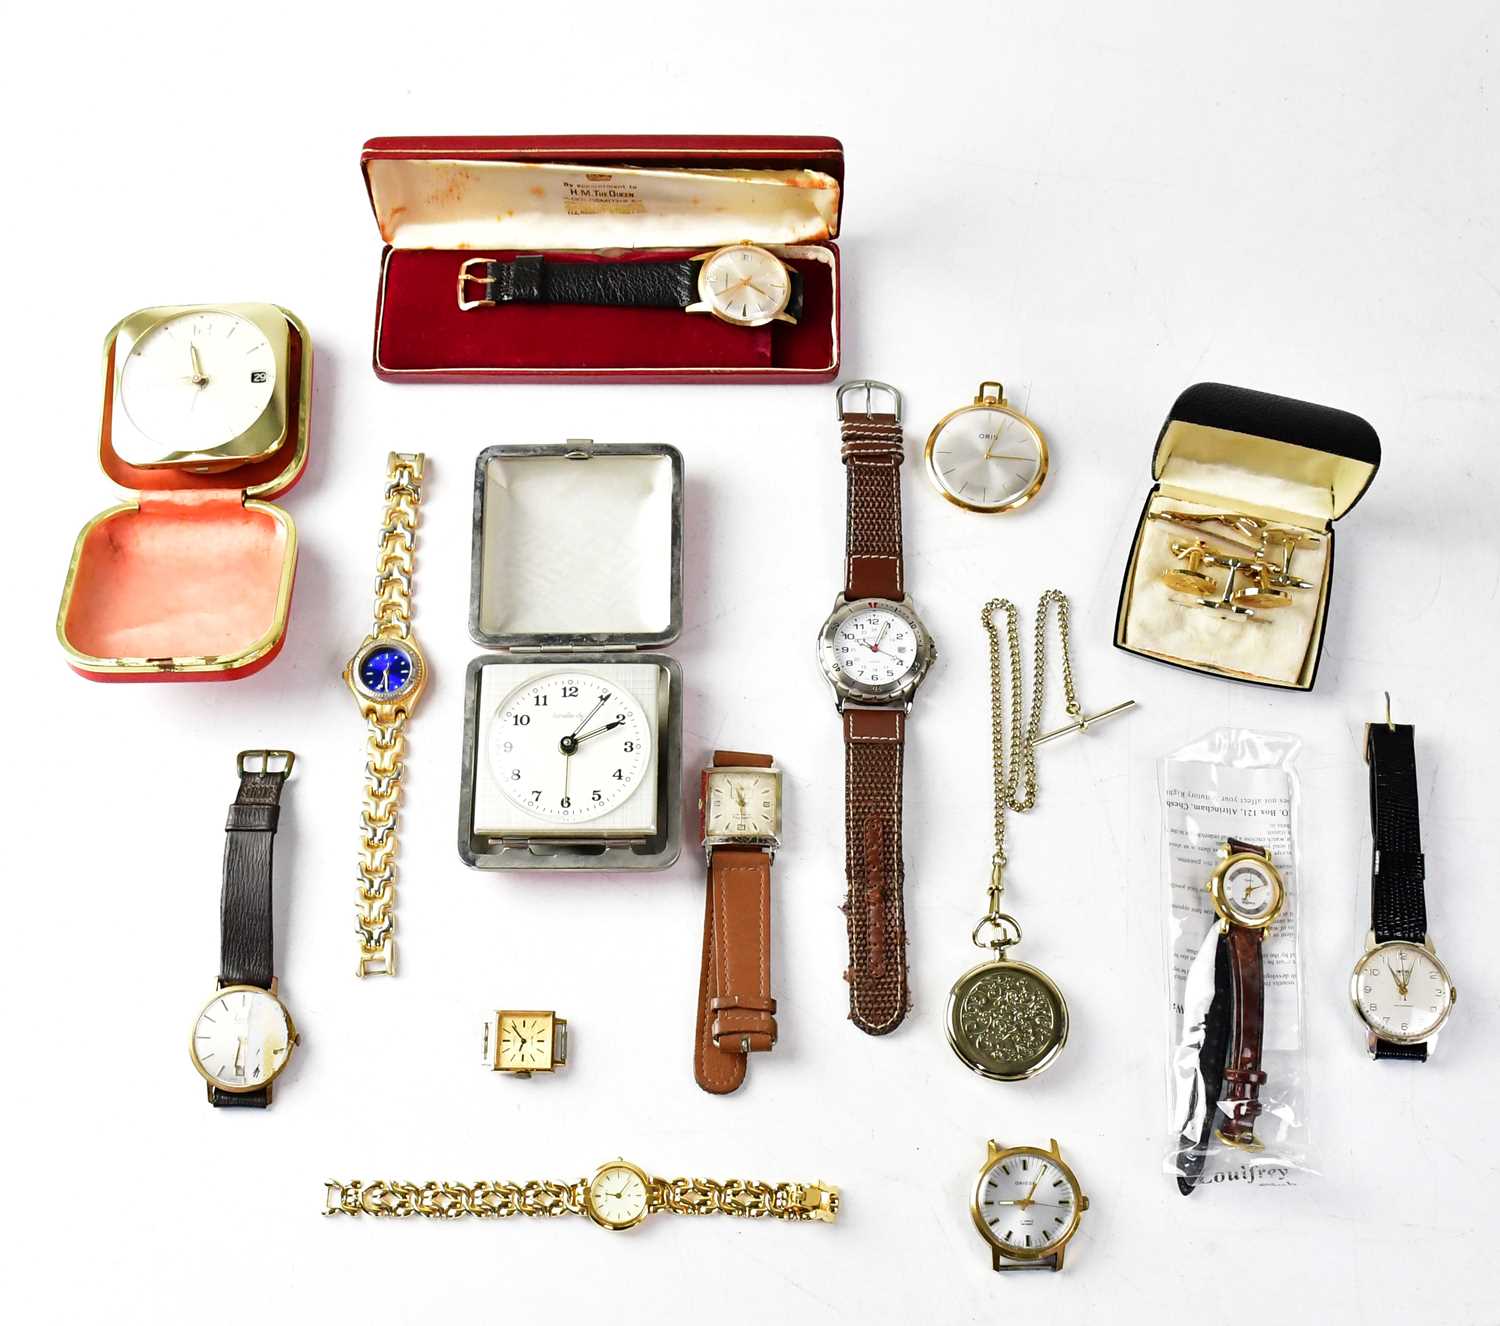 A quantity of wristwatches, pocket watches and clocks to include Accurist, Oriosa, Oris, etc.